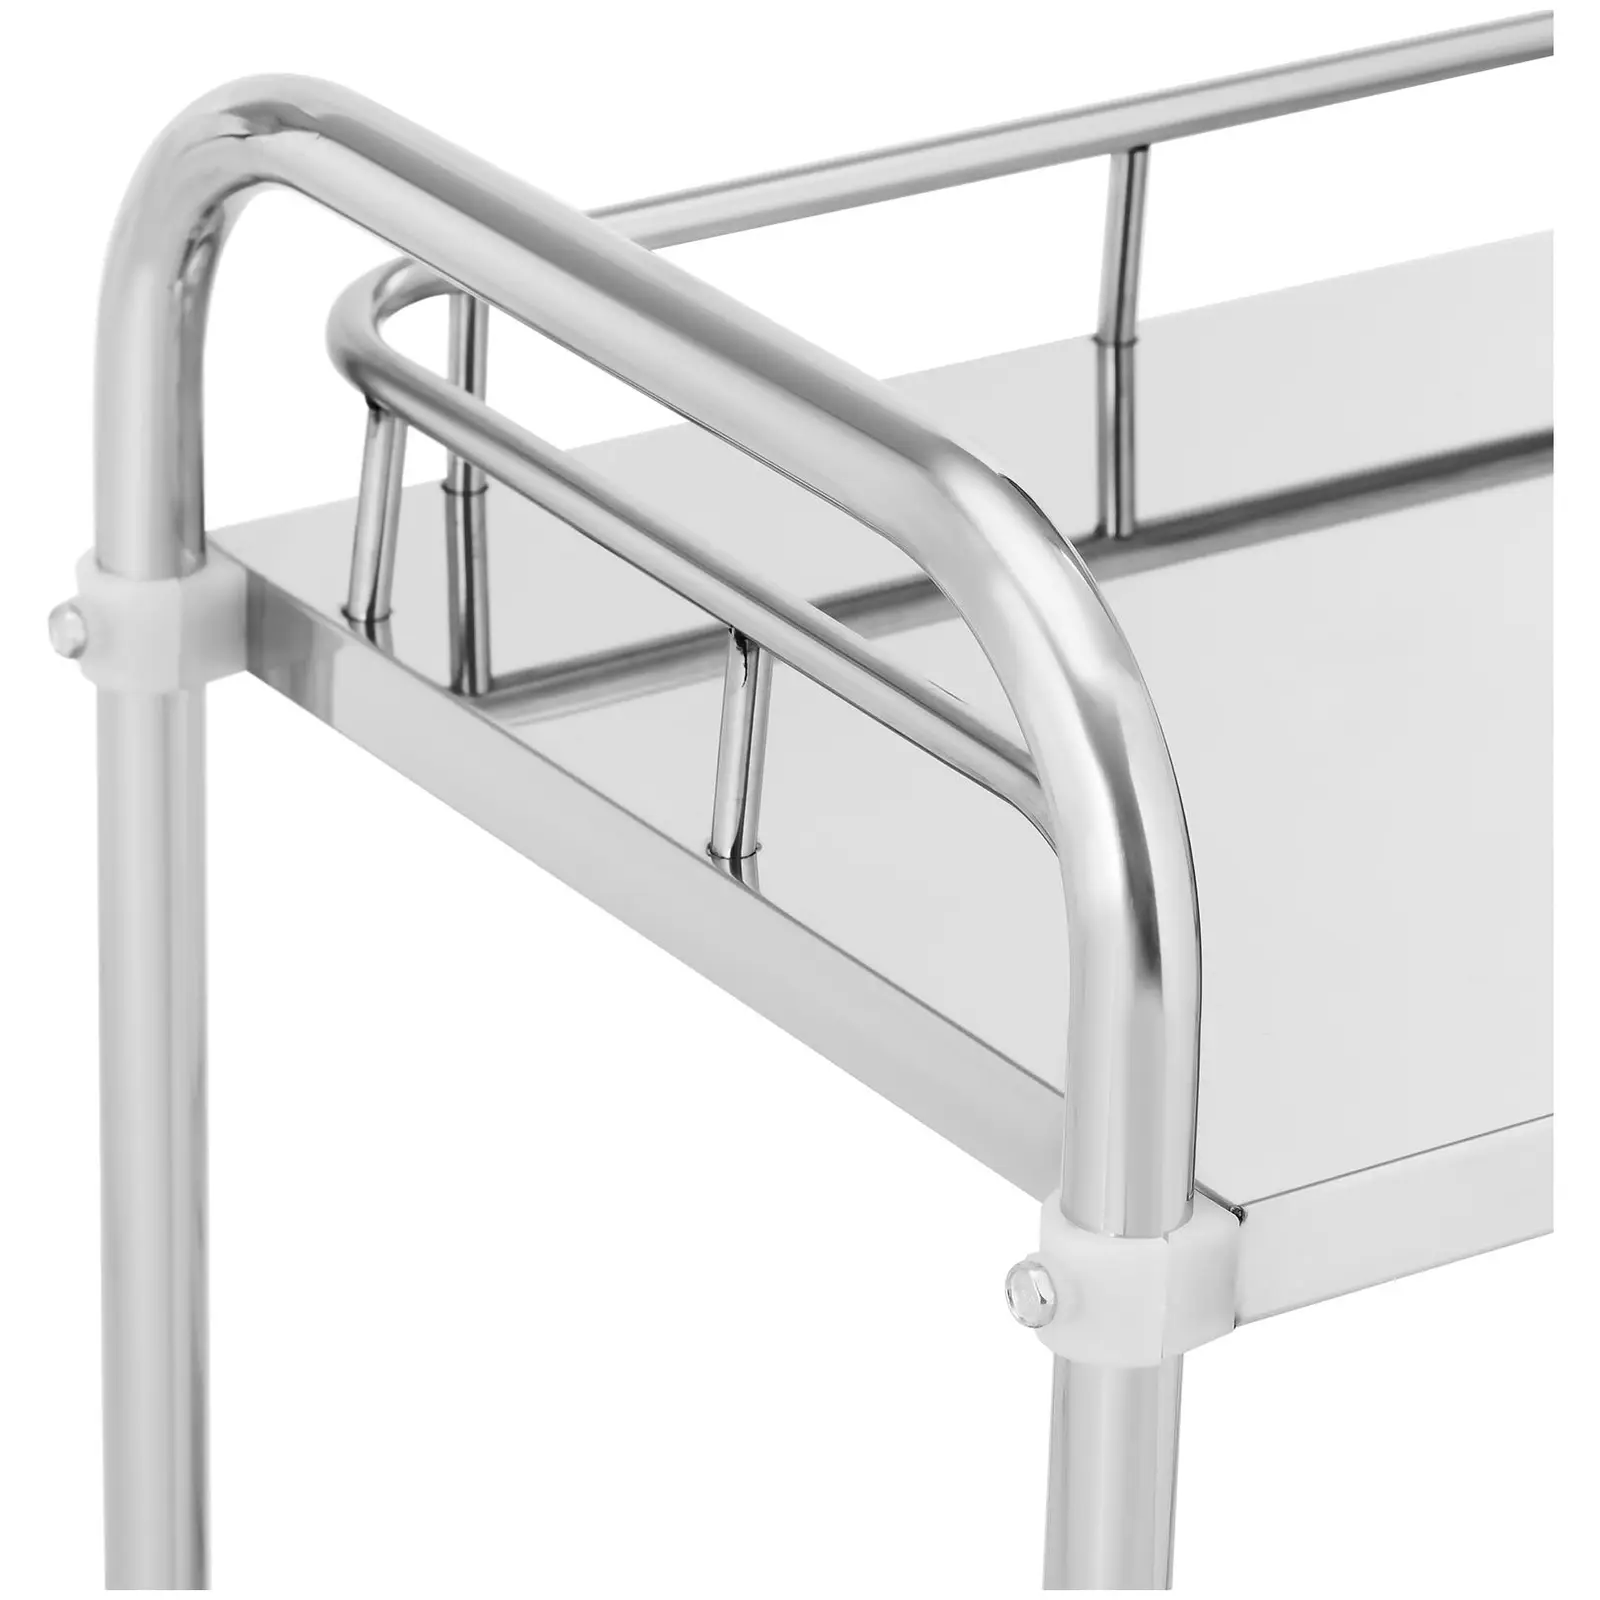 Laboratory Trolley - stainless steel - 2 shelves each 45 x 36 x 2.5 cm - 20 kg